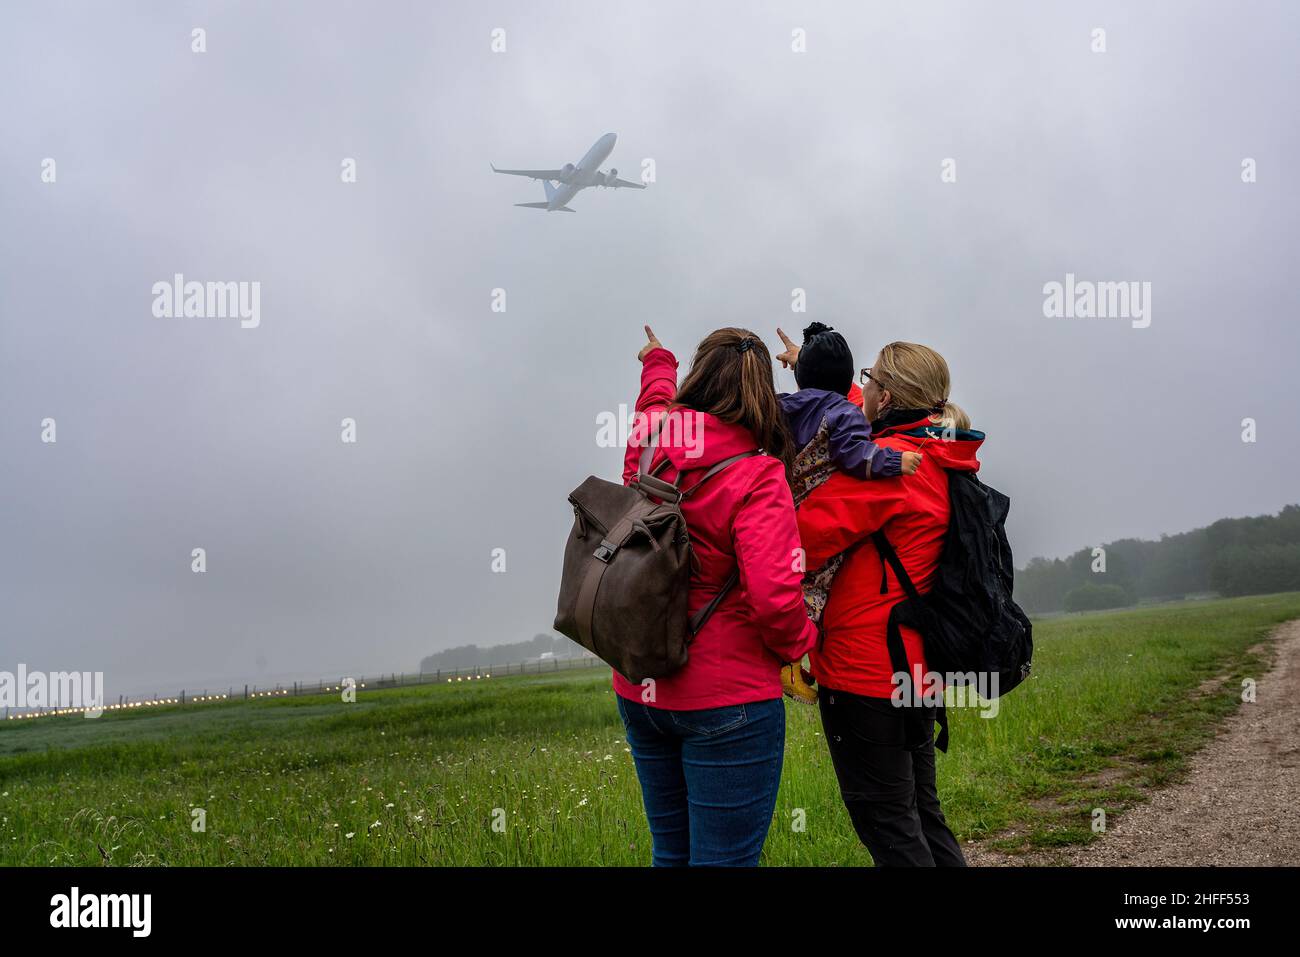 Two women with a child in their arms watch airplanes Stock Photo